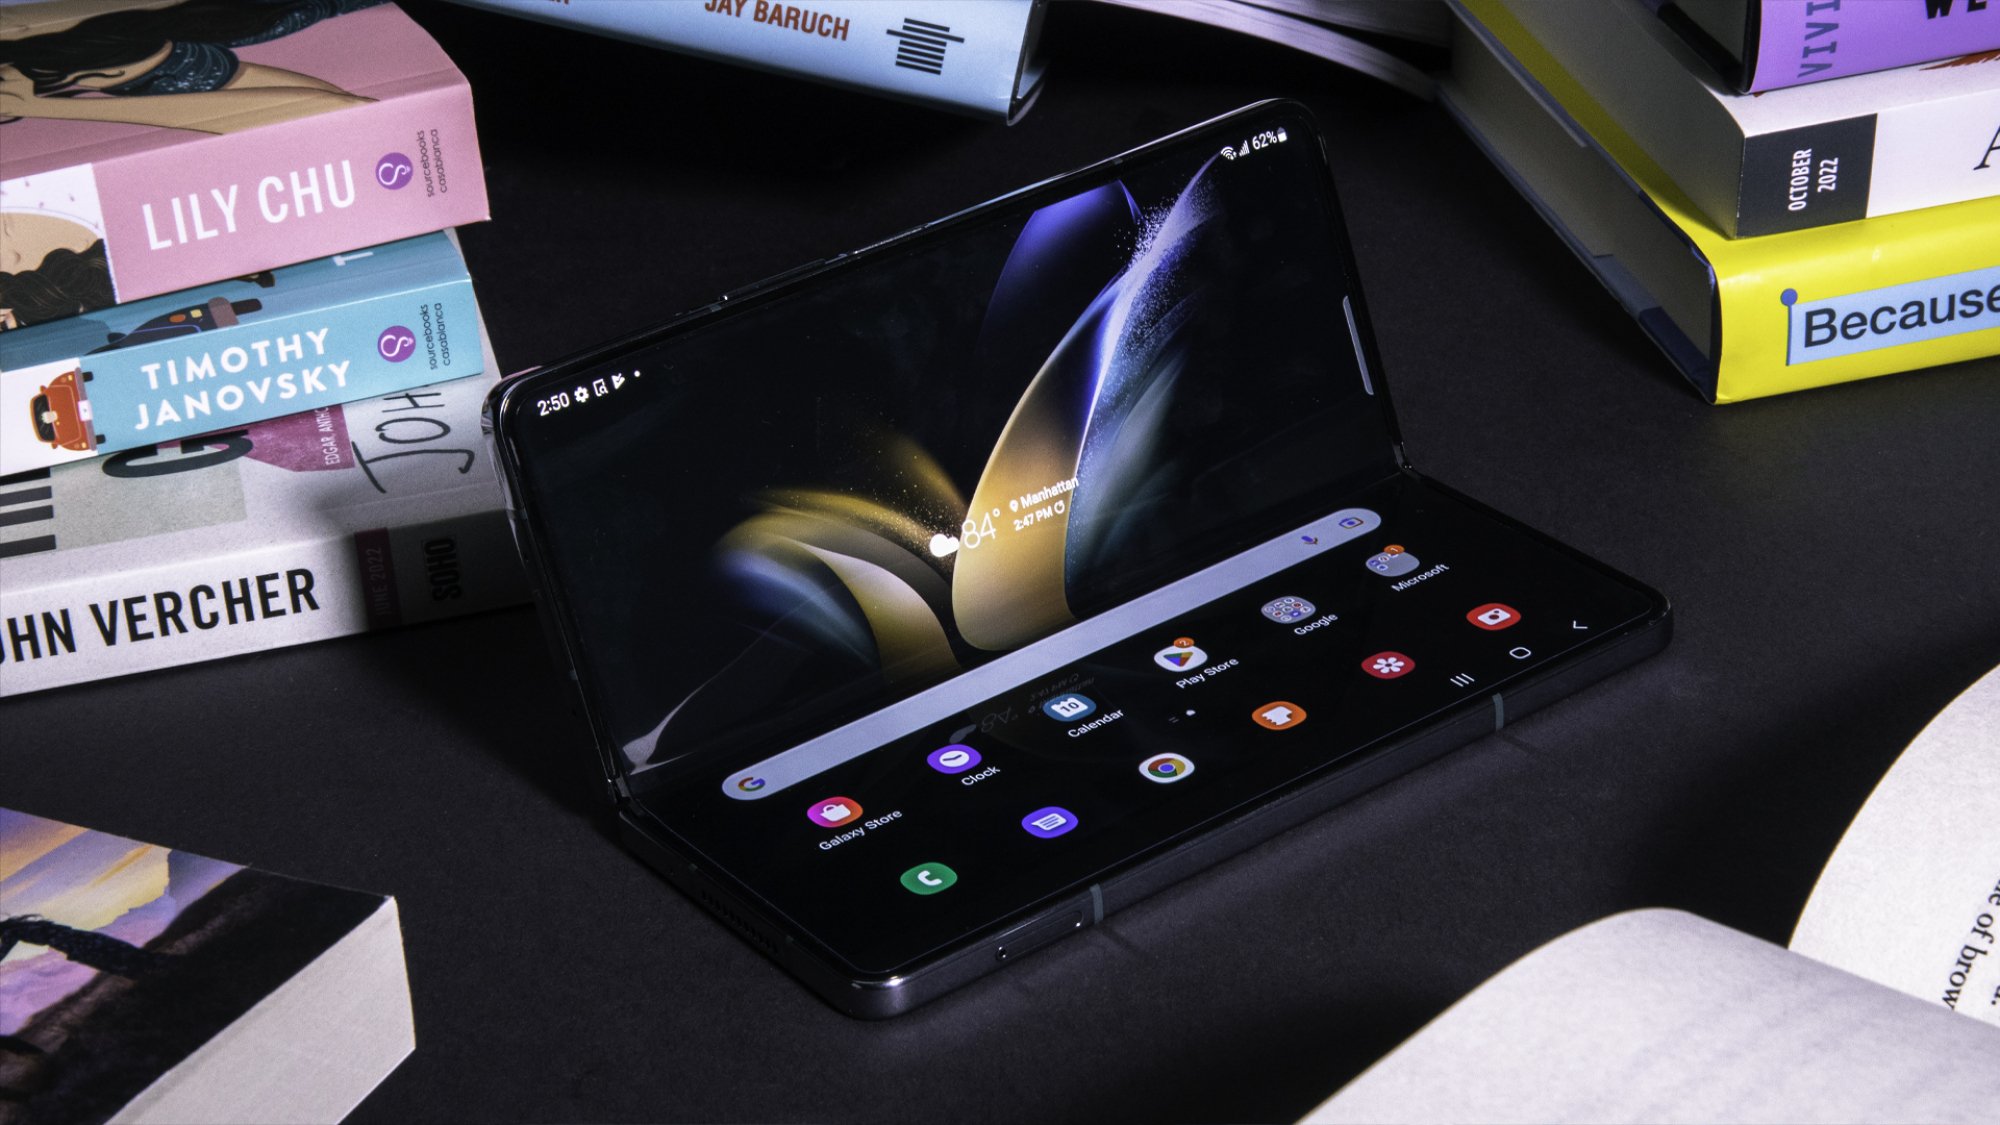 Samsung Galaxy Z Fold 4 half open with inner display visible and surrounded by physical books